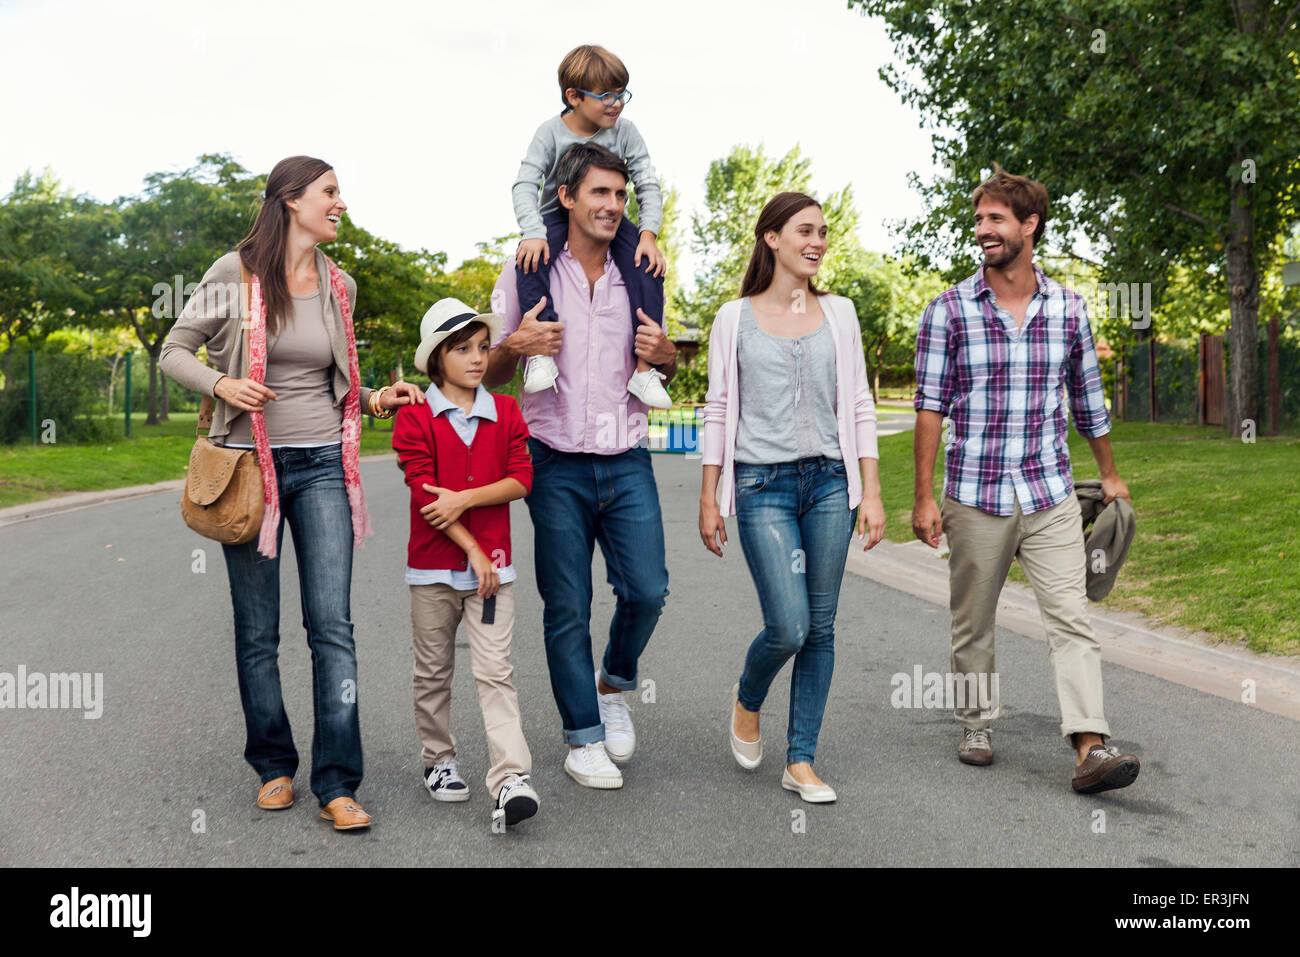 Family walking together in street Stock Photo